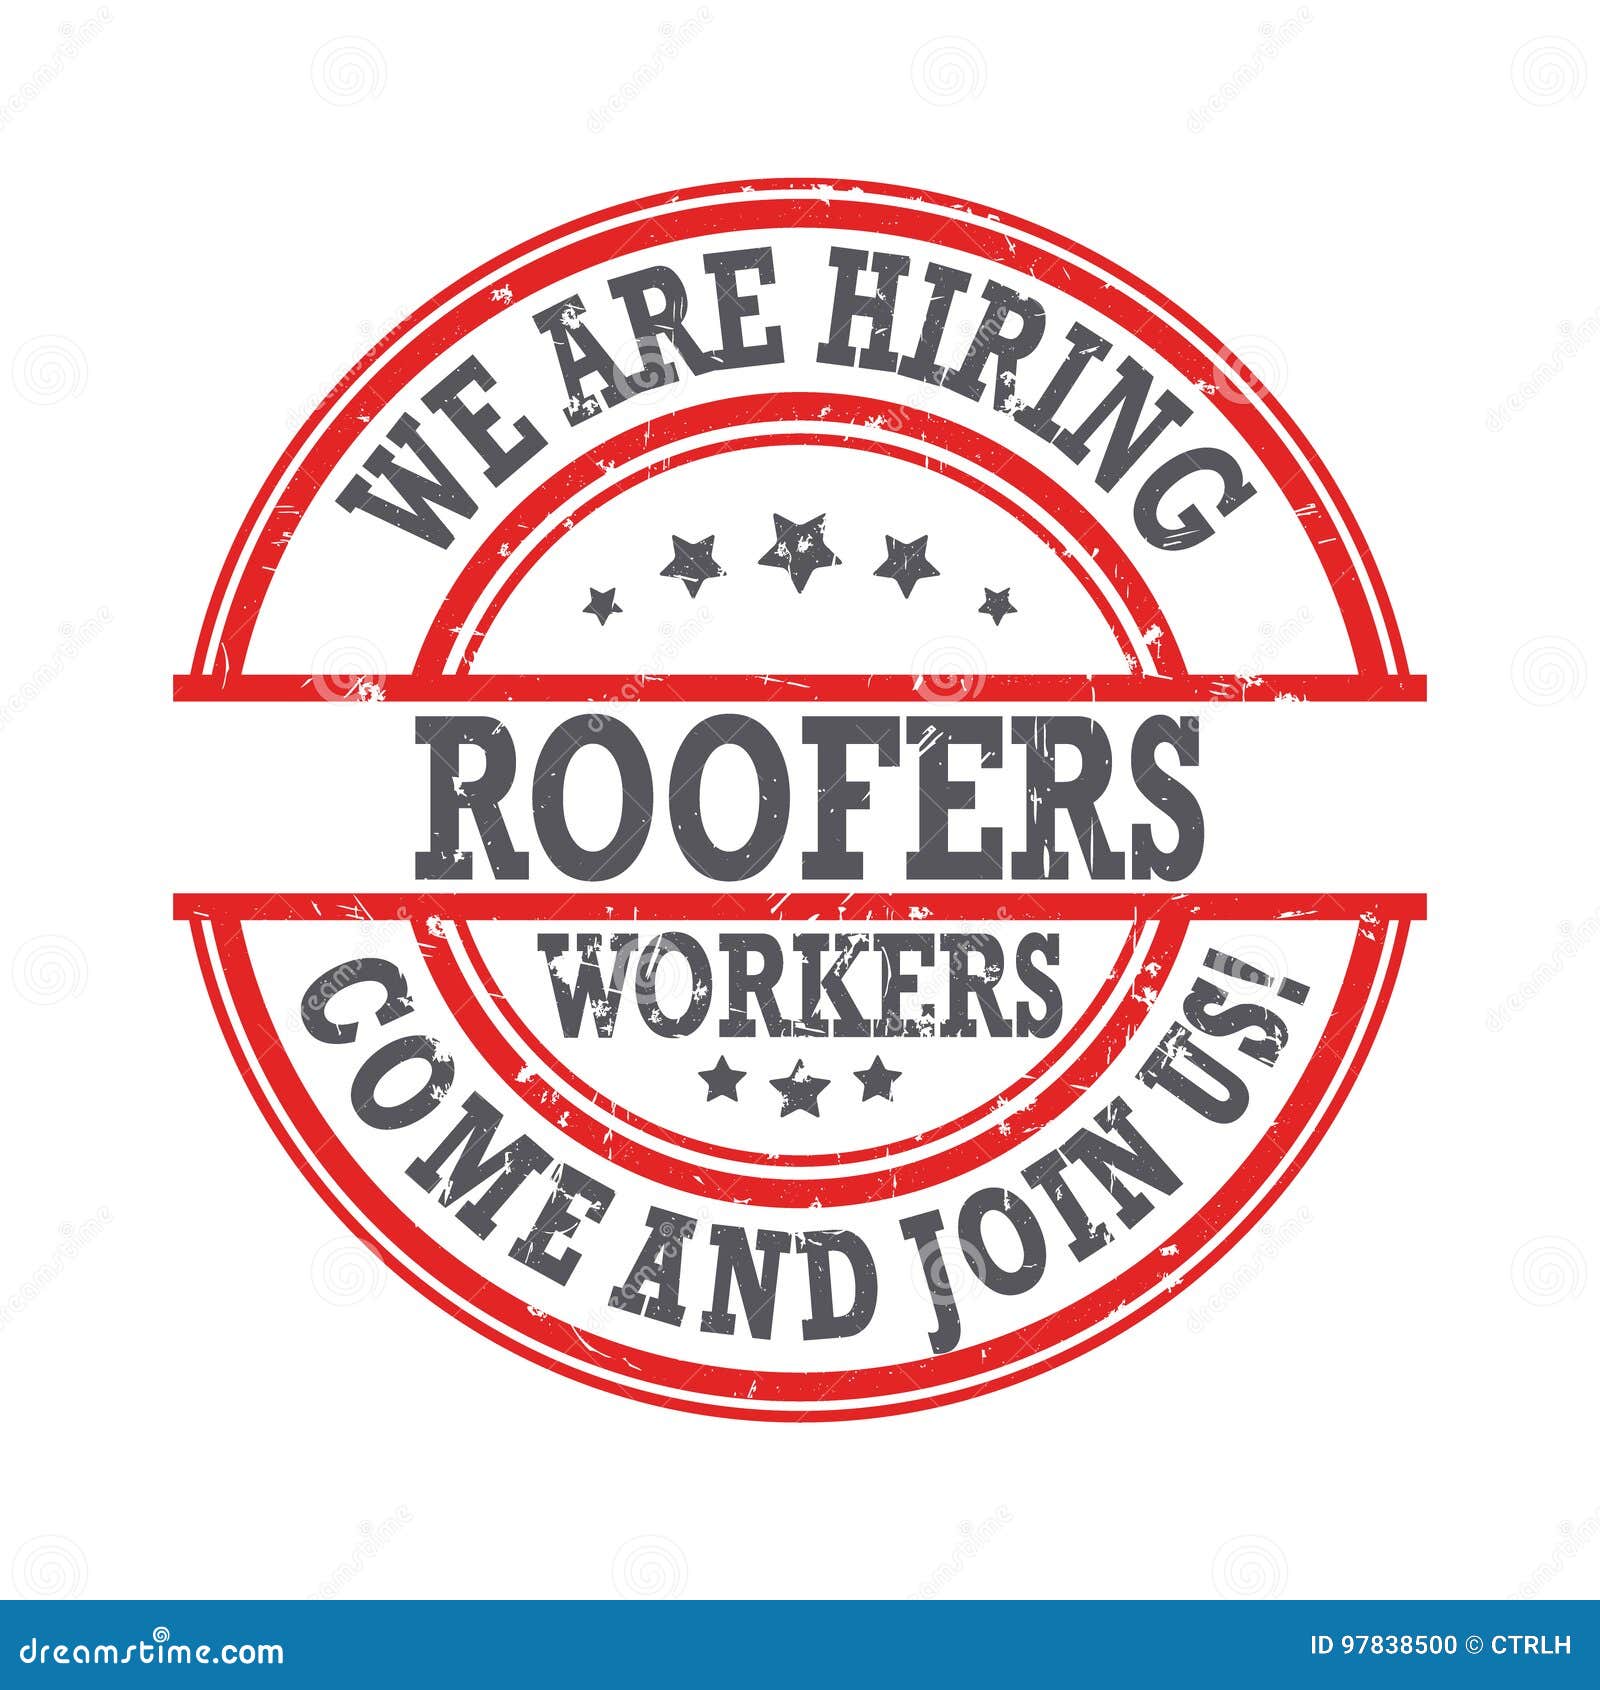 roofers workers - we are hiring - job offer stamp